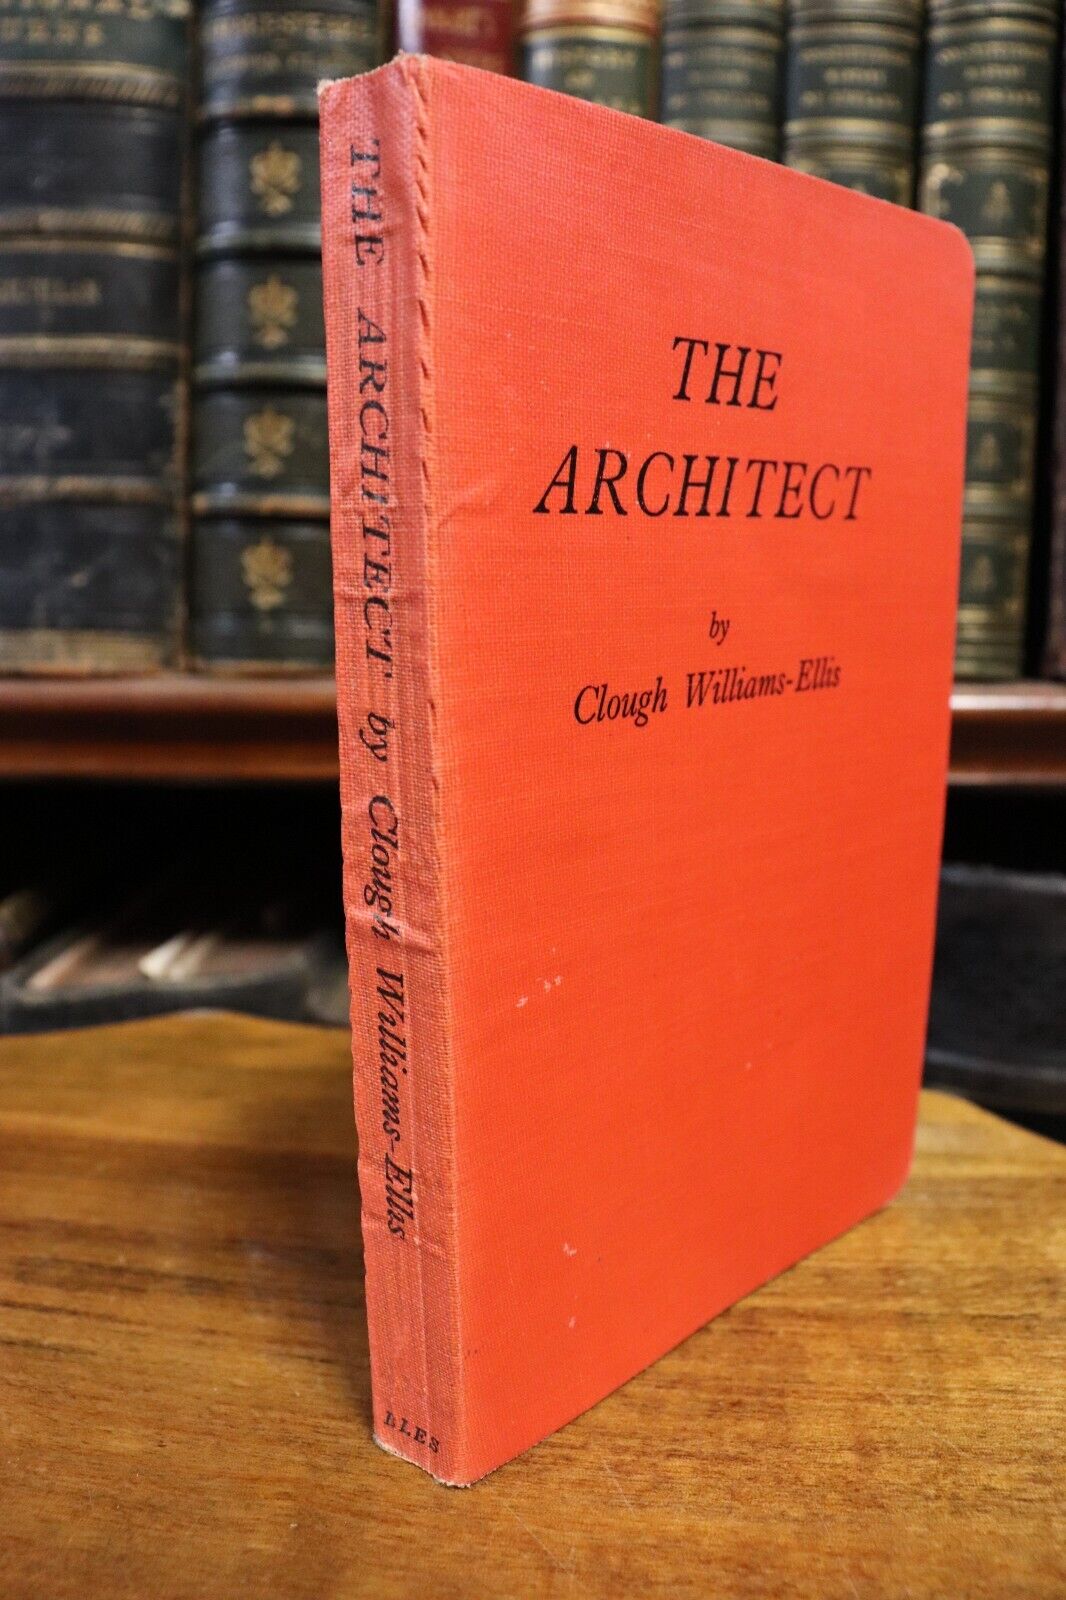 The Architect by Clough Williams-Ellis - 1929 - 1st Ed. Architecture Book